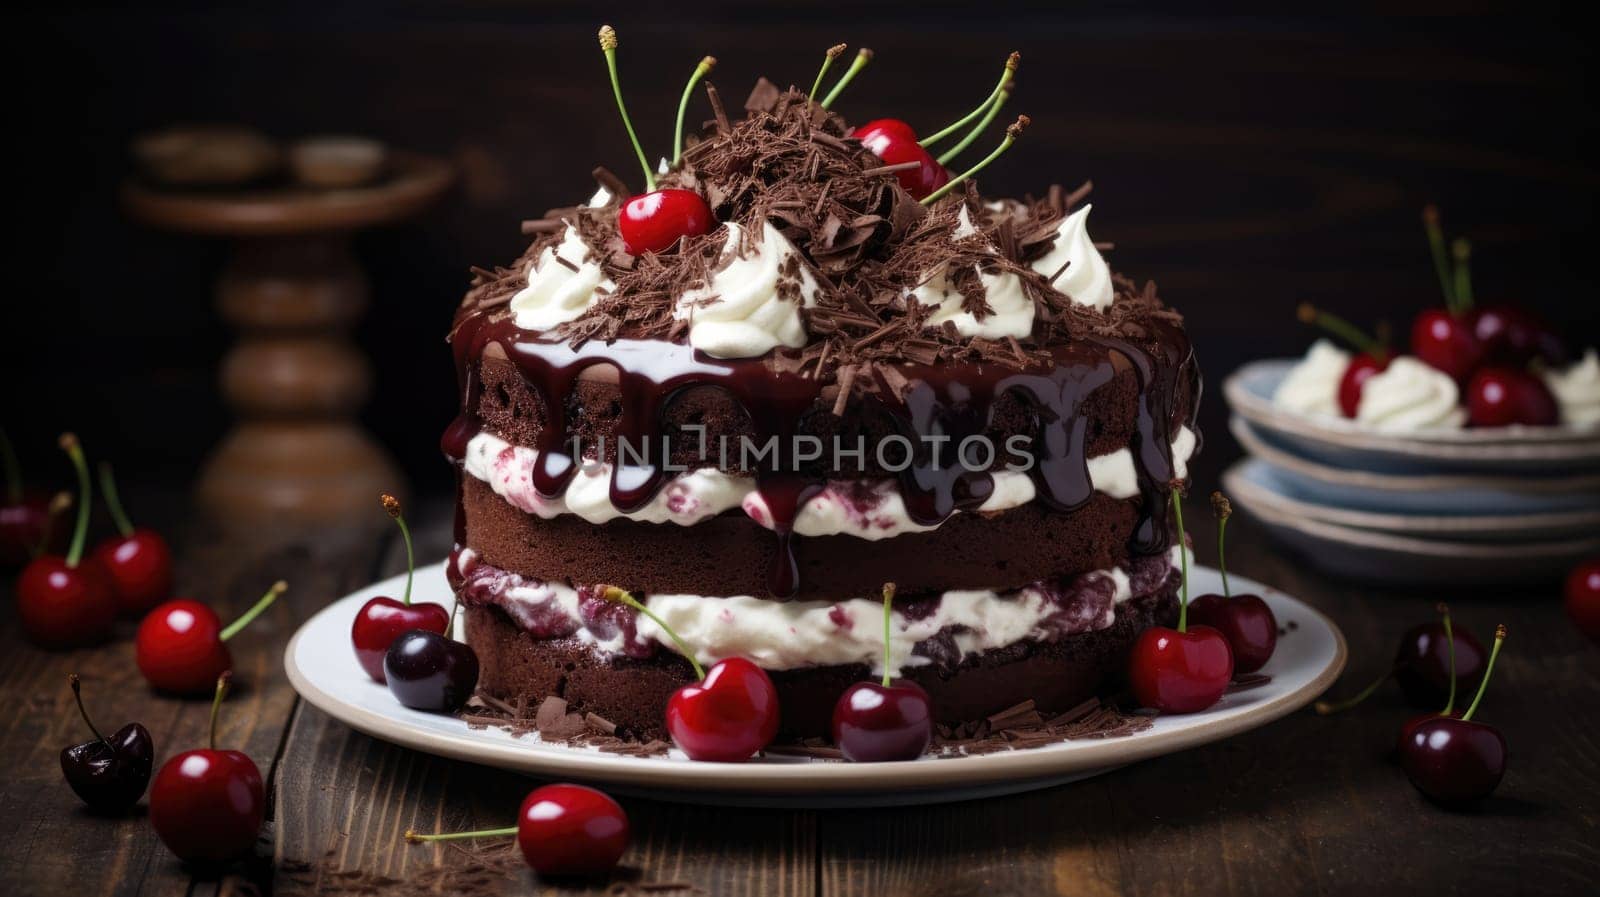 Black forest cake decorated with whipped cream and cherries. by natali_brill